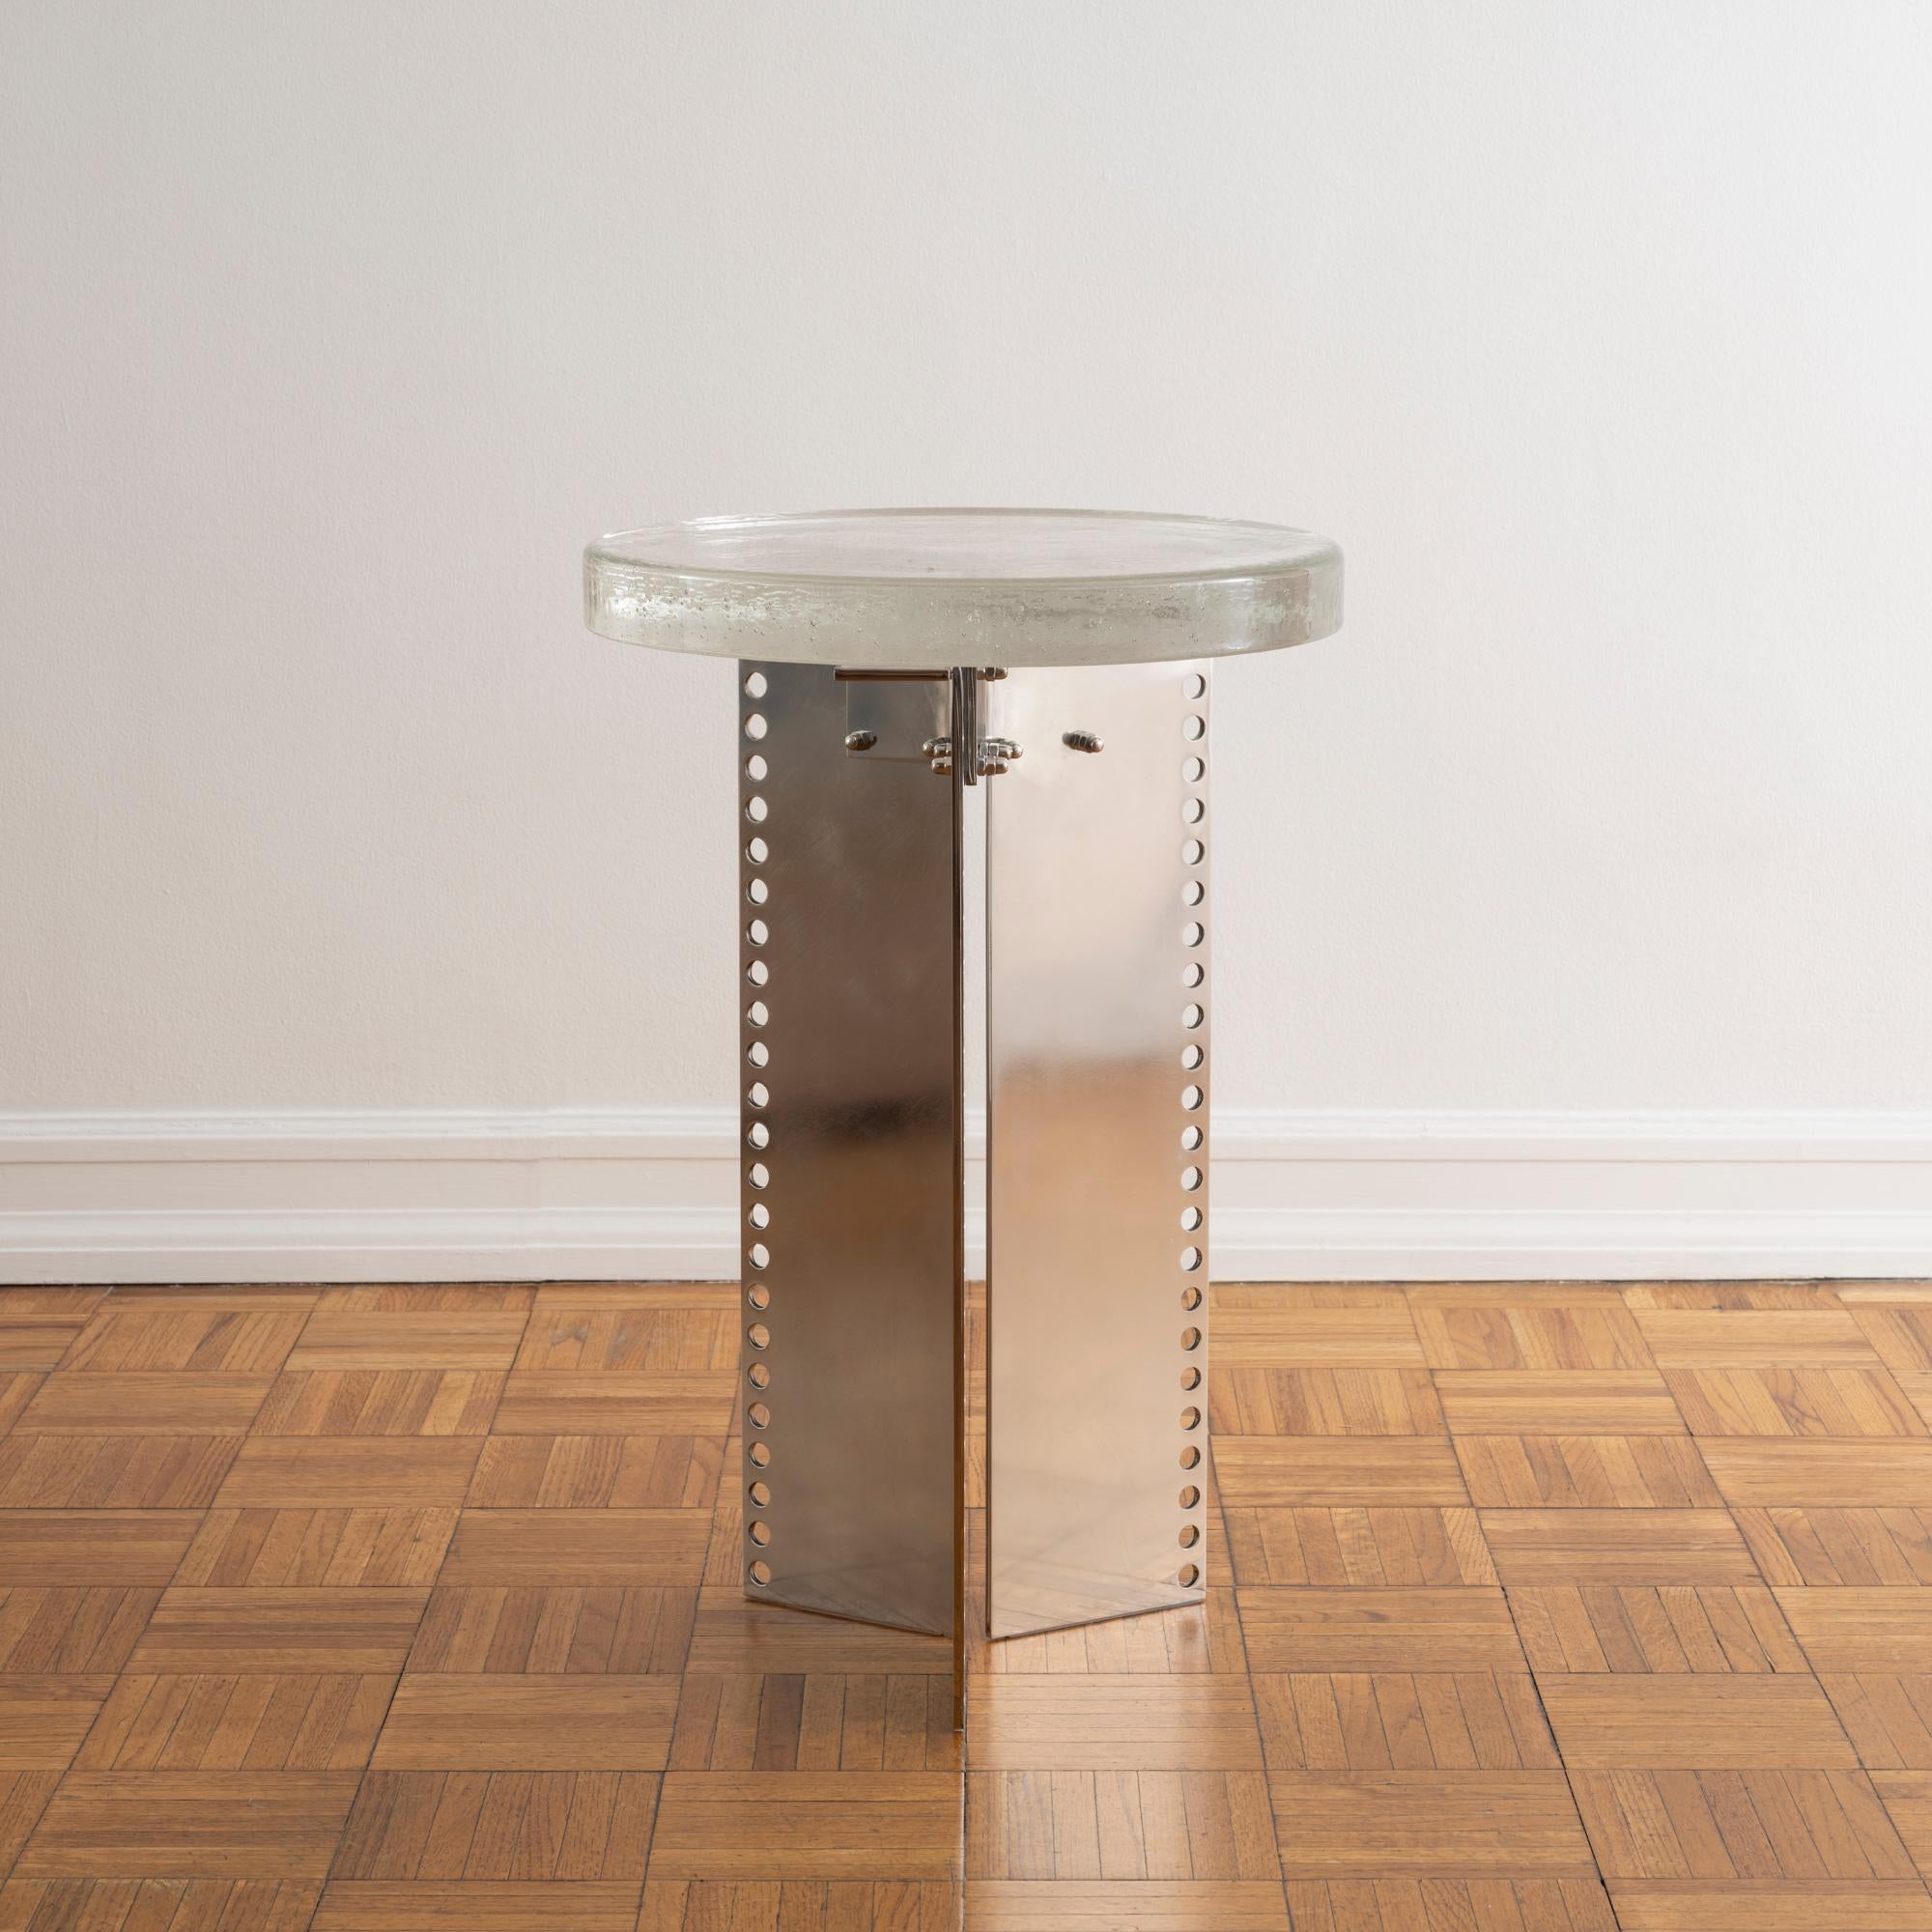 Contemporary accent table comprised of a circular seeded glass top on an architectural base of perforated stainless steel. 

The glass is produced by crucible casting, which creates an organic rippled texture on the underside and features natural